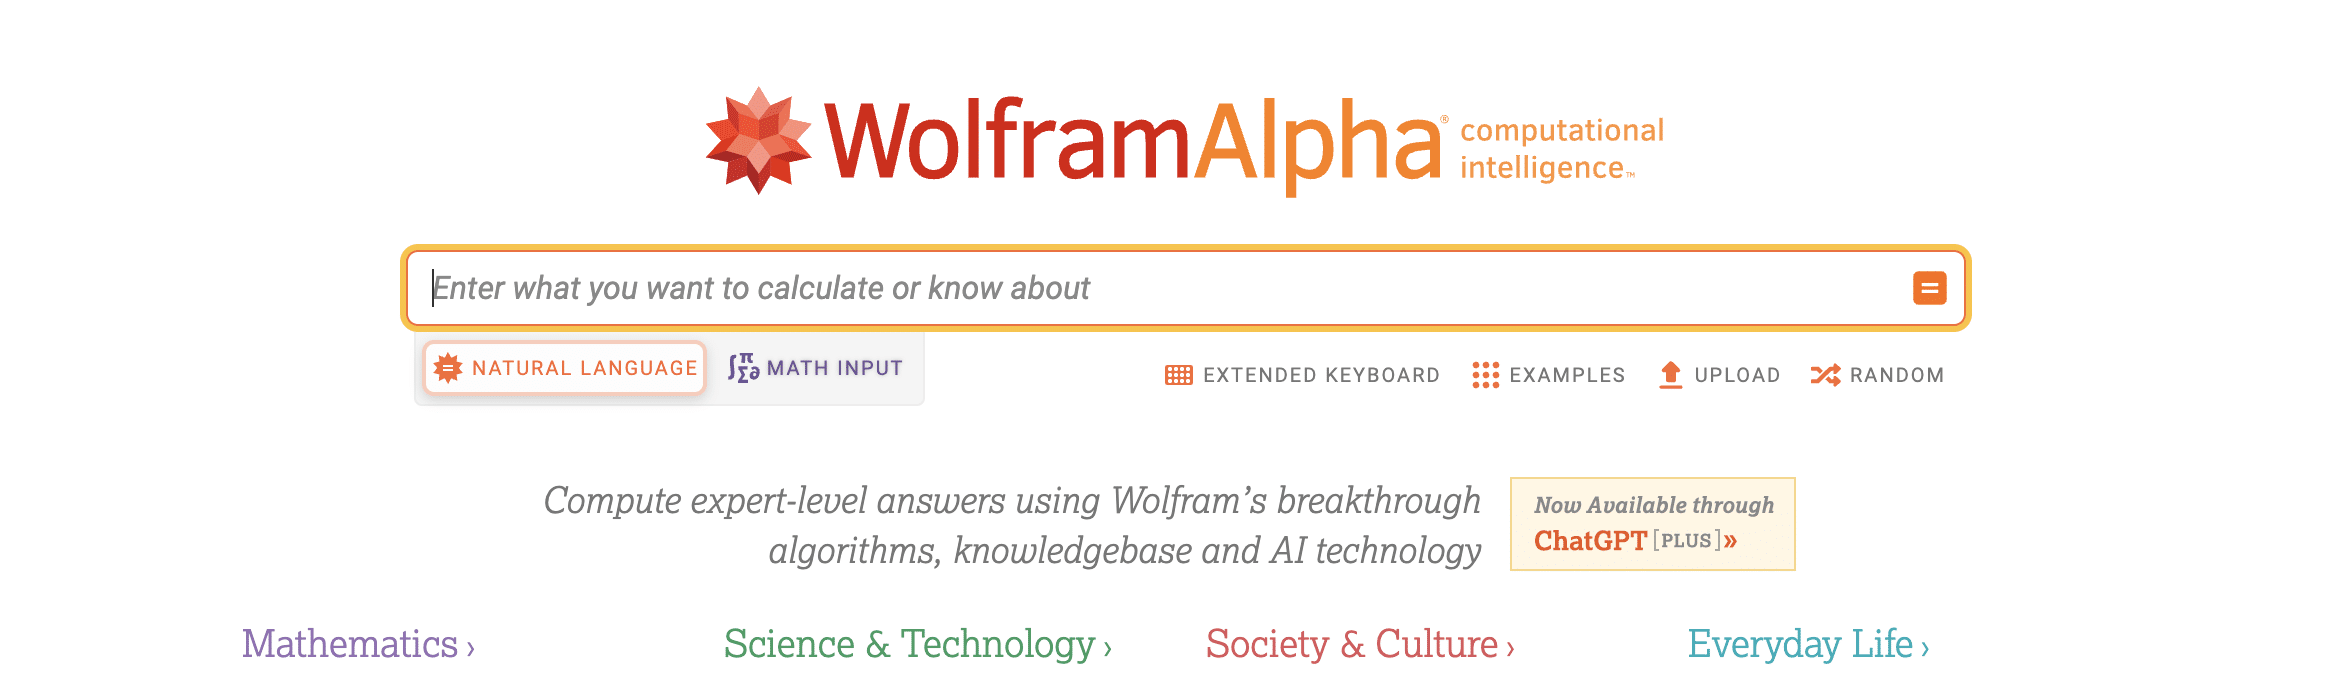 screenshot shows landing page for wolfram alpha search engine